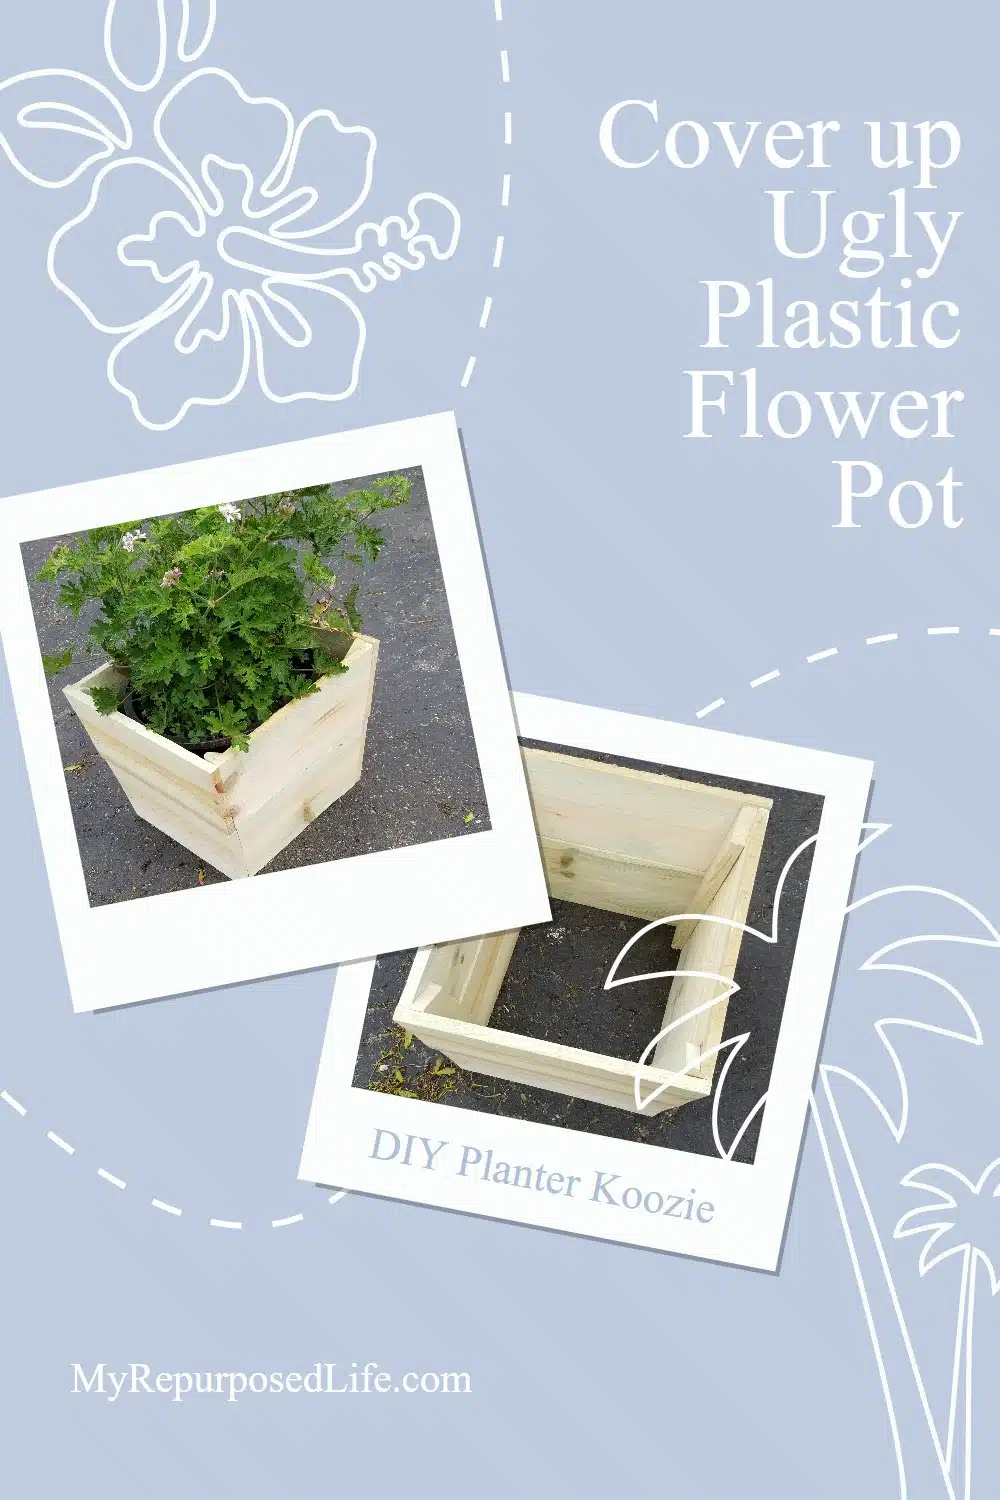 You have a new plant in an ugly flower pot? No problem. Let me show you how to make an easy DIY Plant Koozie out of inexpensive fence boards. Awesome way to display your potted plants on your patio. Step by step directions from #MyRepurposedLife via @repurposedlife